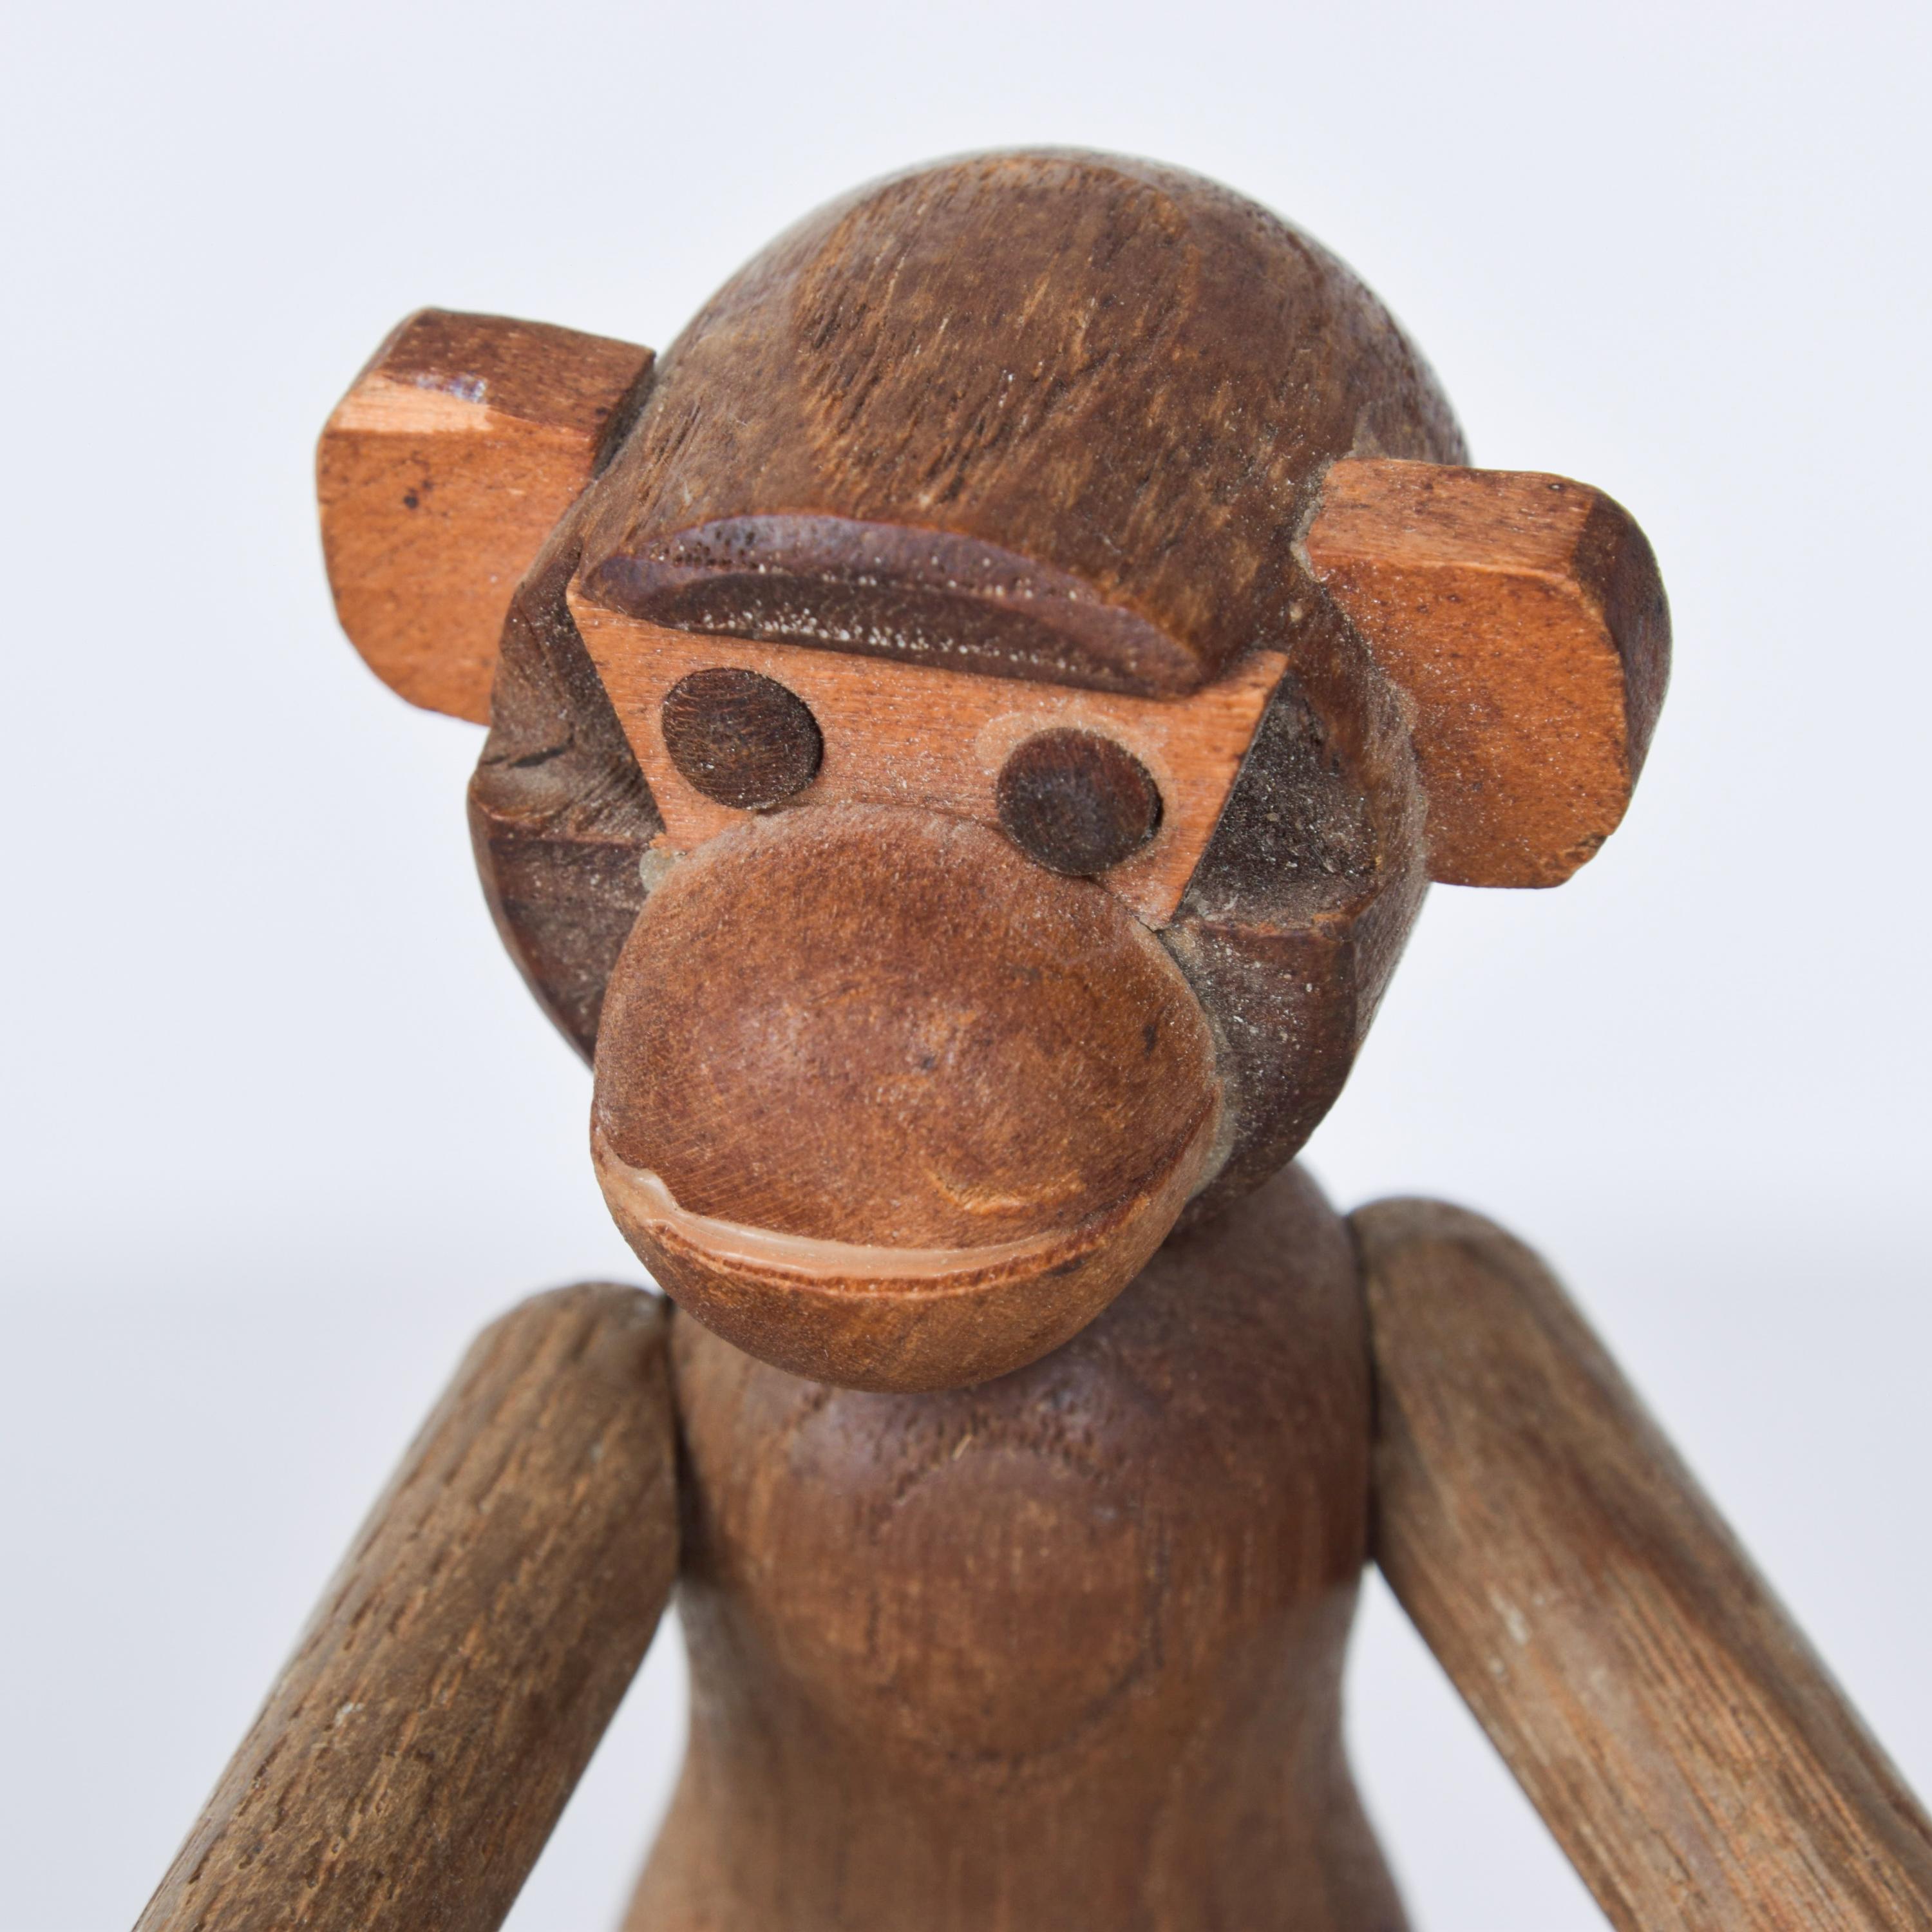 After Kay Bojesen Danish style teak wood jointed flexible toy baby Monkey 1960s vintage Mid-Century Modern
Stamped made in Japan
Dimensions: 5